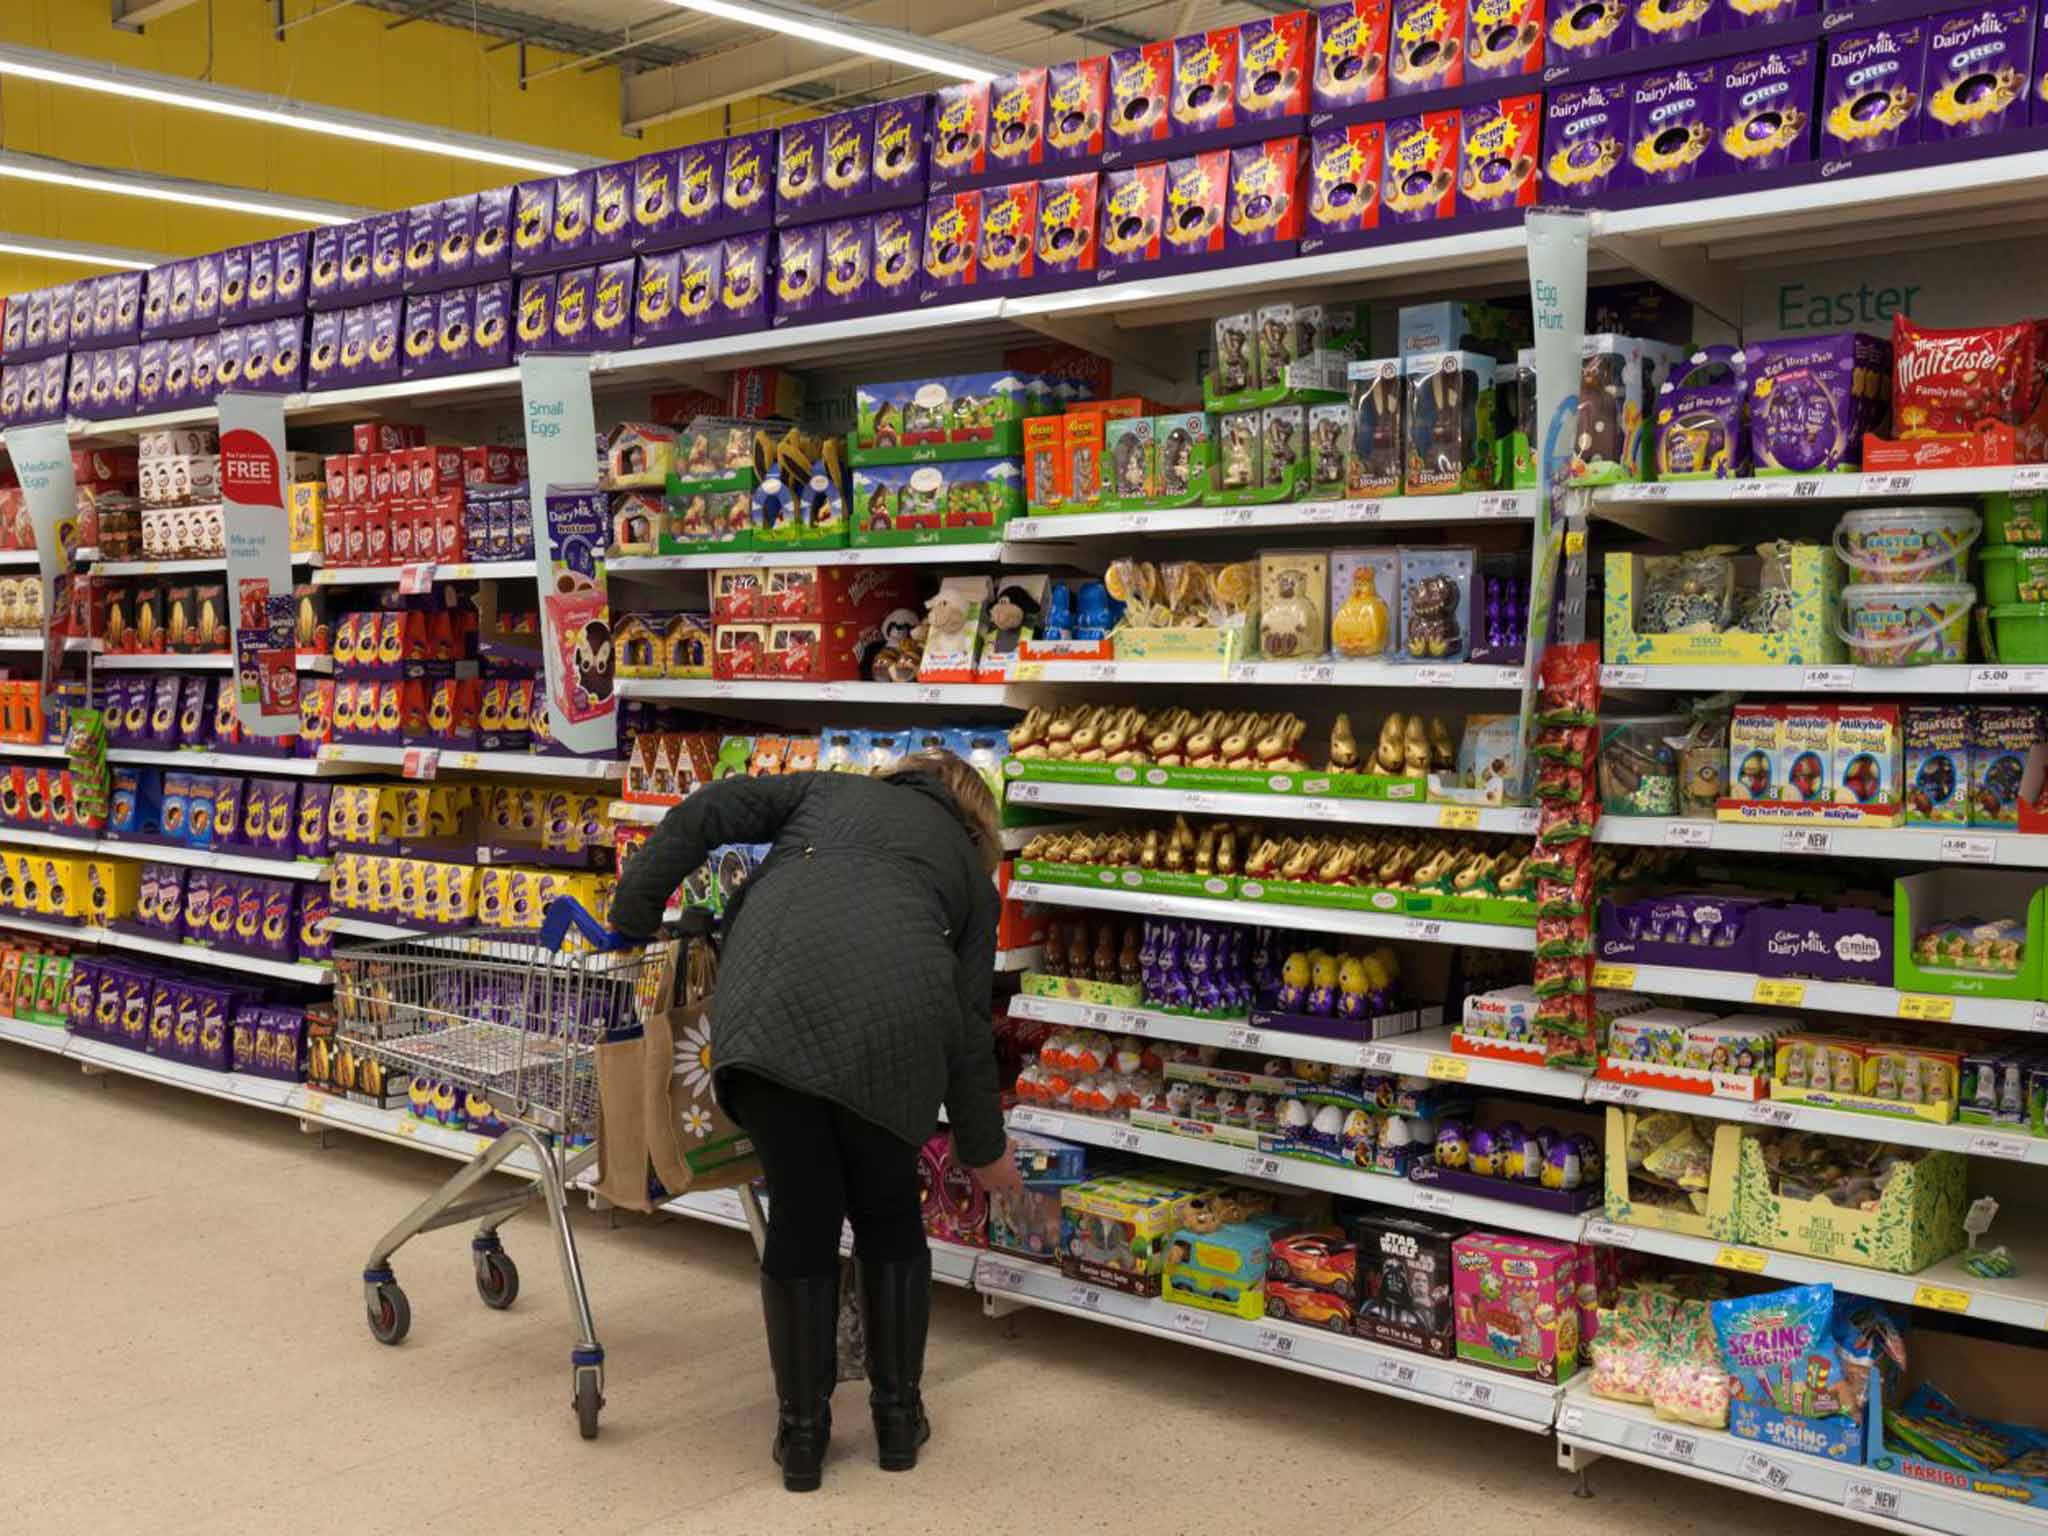 'If we Vote Leave on 23 June, Easter will taste all the more sweeter next year'